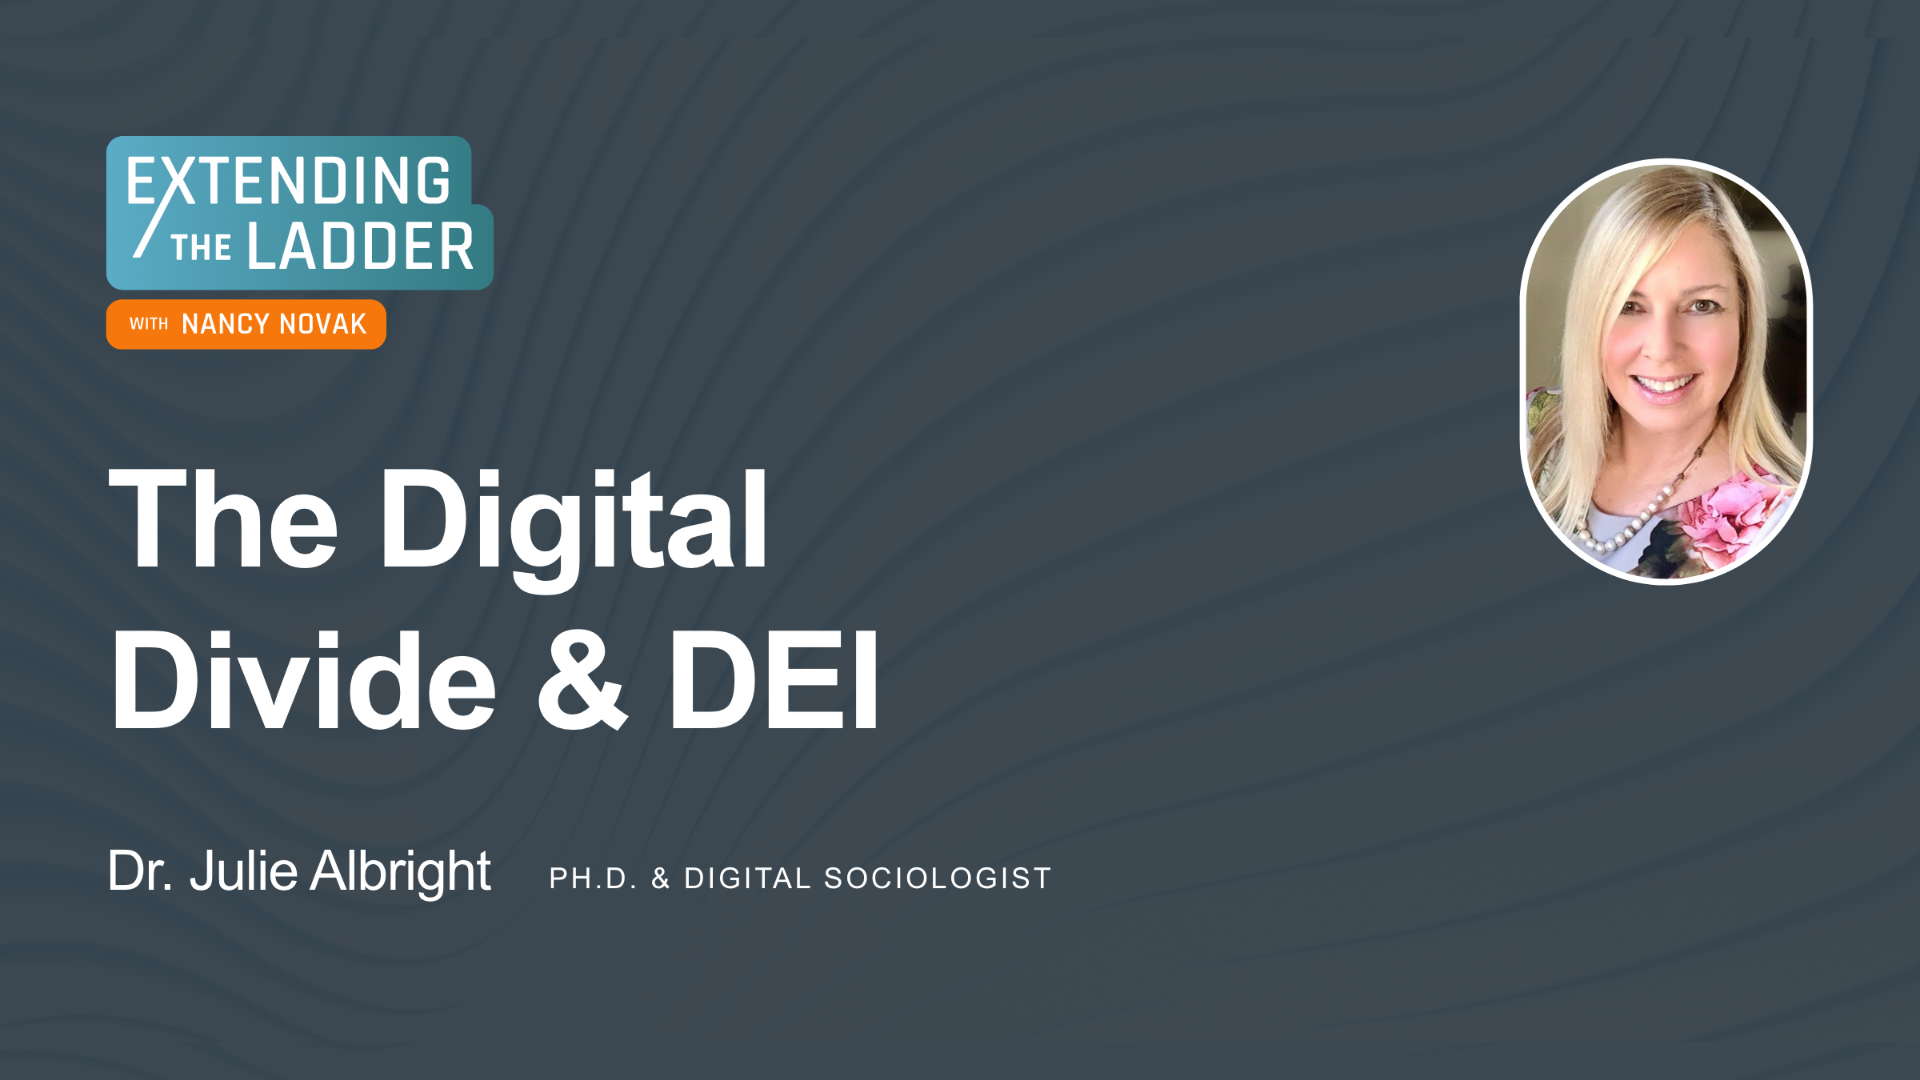 Featured image: digital equity with Dr. Julie Albright.